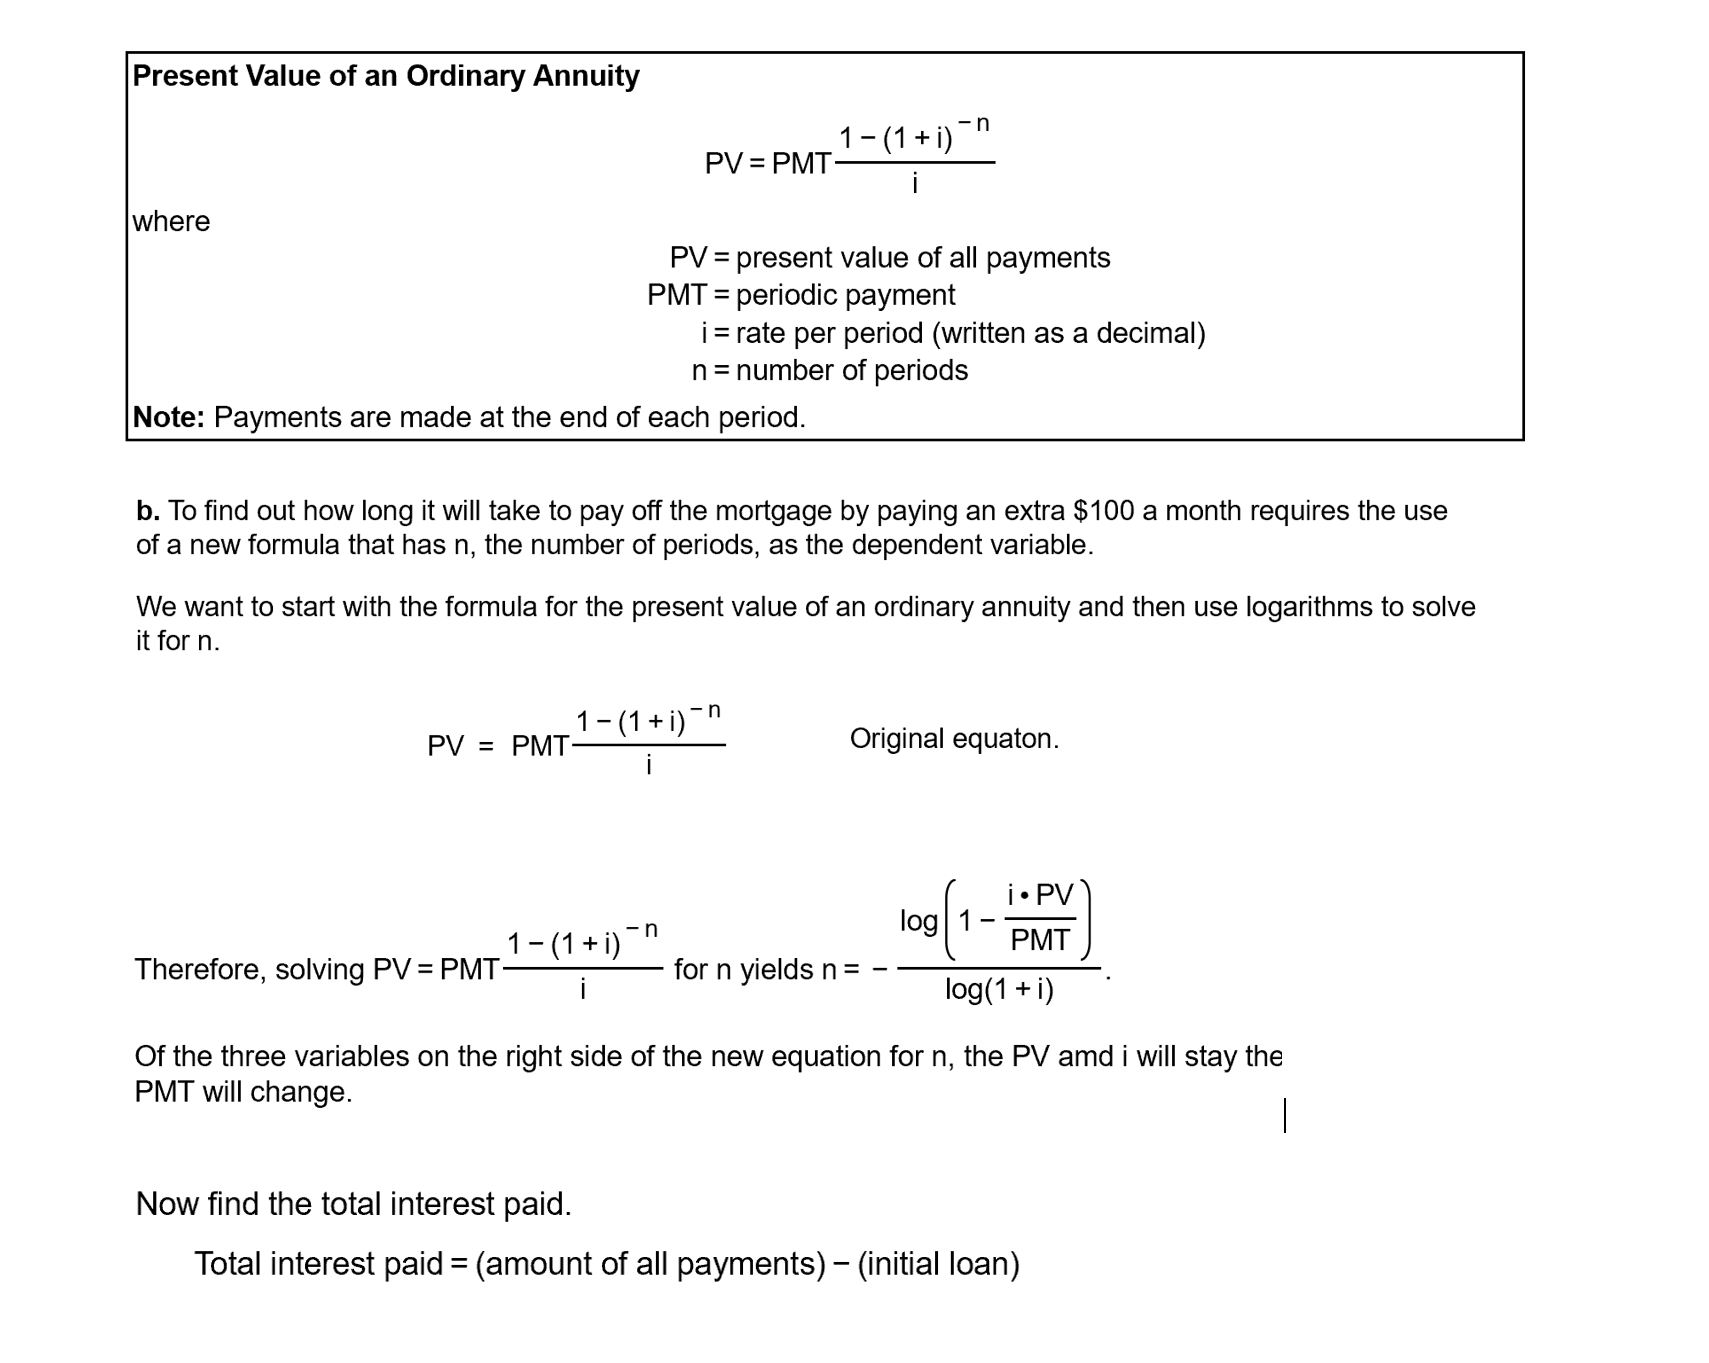 Present Value of an Ordinary Annuity
-n
1-(1 + i)
PV = PMT-
where
PV = present value of all payments
PMT = periodic payment
i= rate per period (written as a decimal)
n= number of periods
%3D
%3D
Note: Payments are made at the end of each period.
b. To find out how long it will take to pay off the mortgage by paying an extra $100 a month requires the use
of a new formula that has n, the number of periods, as the dependent variable.
We want to start with the formula for the present value of an ordinary annuity and then use logarithms to solve
it for n.
1-(1+ i)
-n
PV = PMT:
Original equaton.
i• PV
log 1
1-(1+ i)"
PMT
Therefore, solving PV = PMT
for n yields n=
log(1 + i)
Of the three variables on the right side of the new equation for n, the PV amd i will stay the
PMT will change.
Now find the total interest paid.
Total interest paid = (amount of all payments) – (initial loan)
